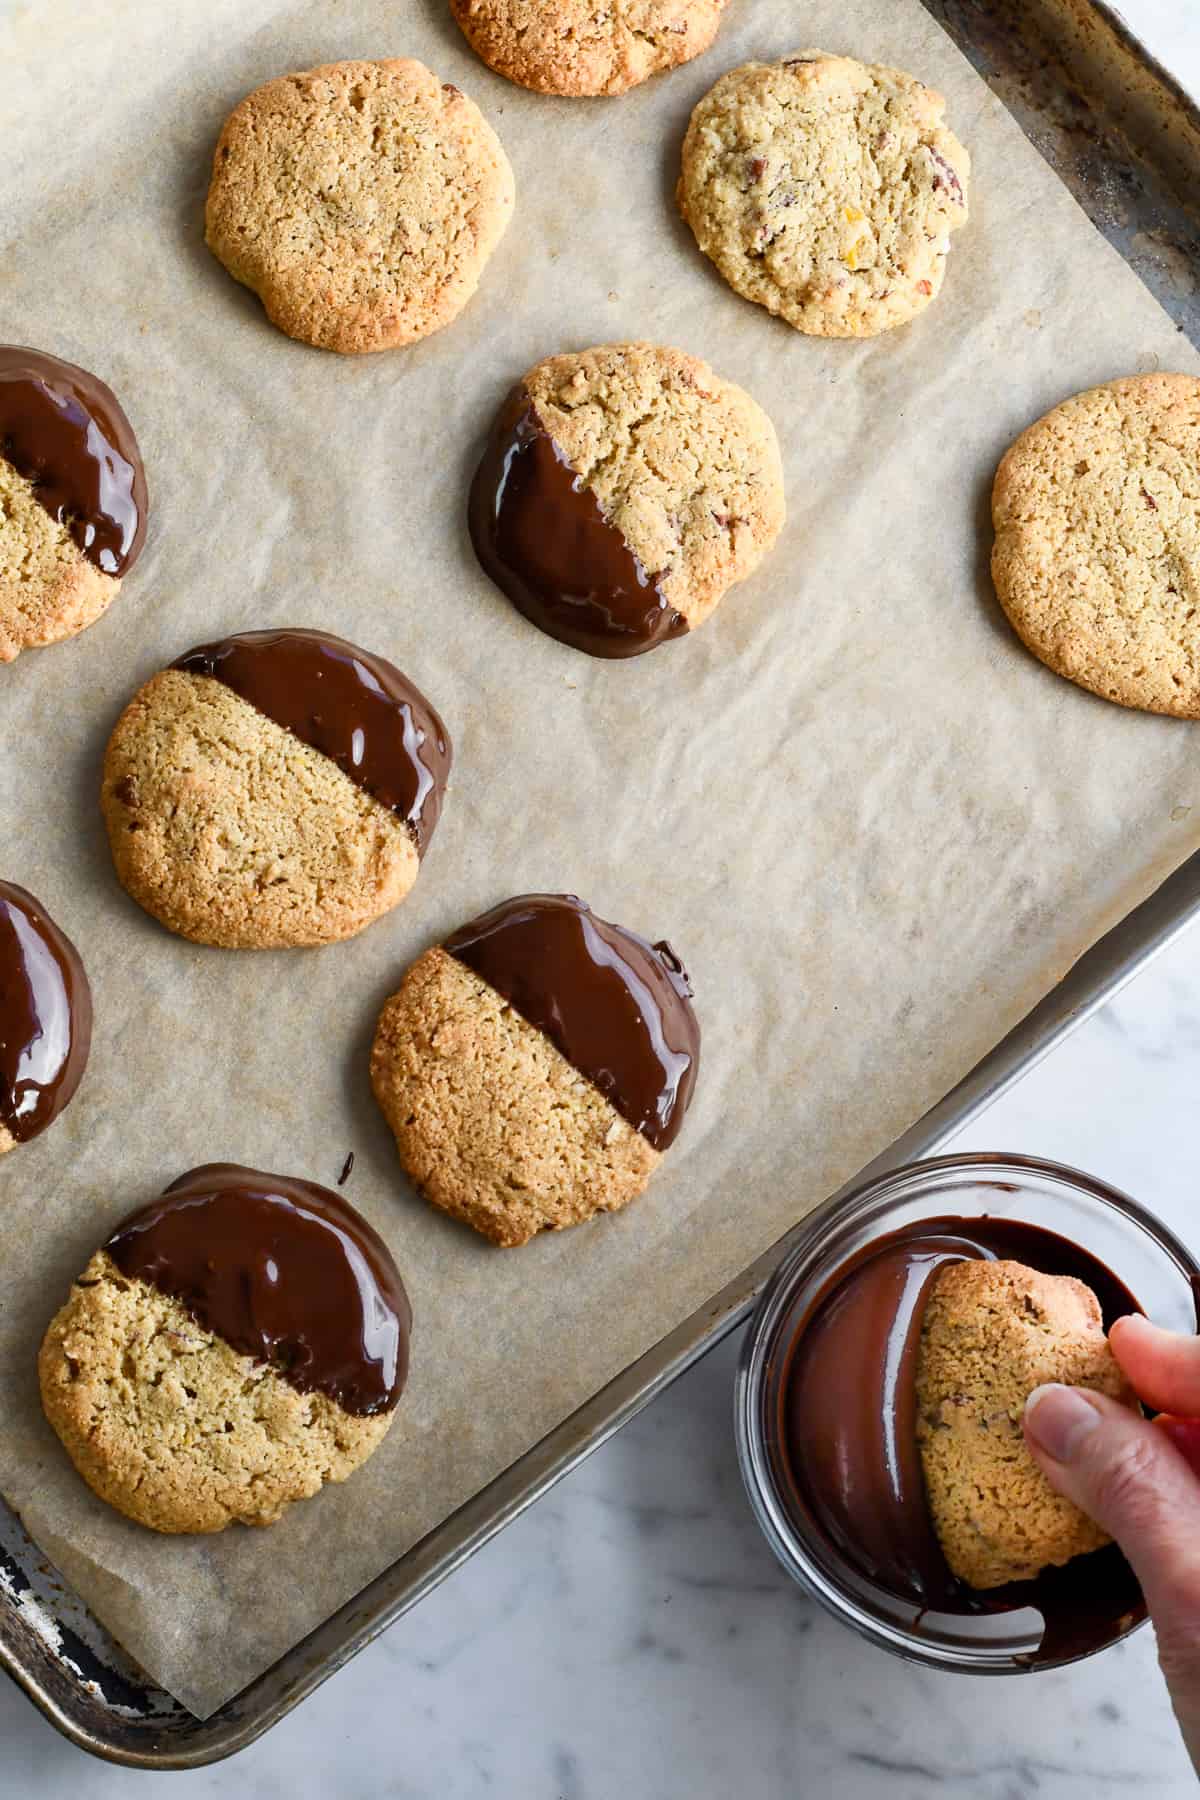 Maple Pecan Cookies with Chocolate Glaze dipping cookies in chocolate